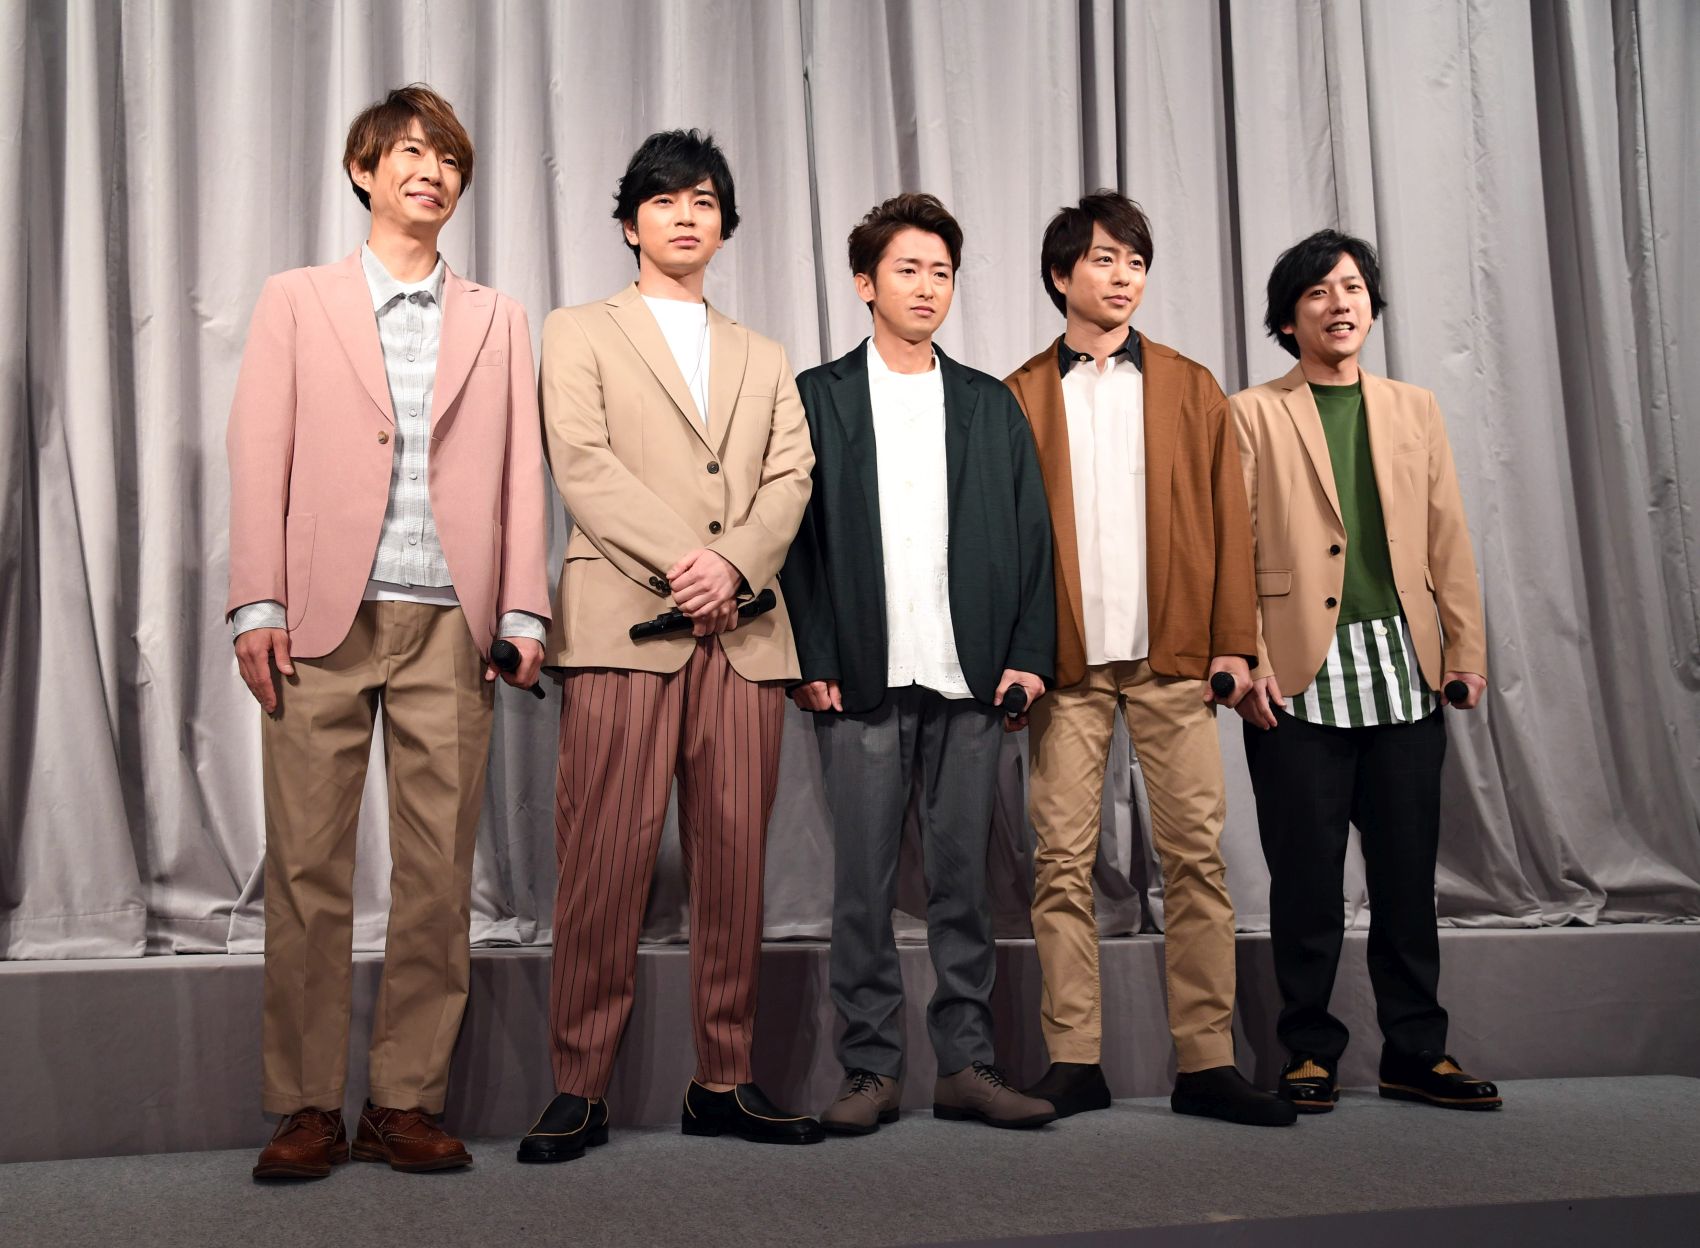 ‘Let’s End With A Smile’: J-Pop Idol Group Arashi Bows Out